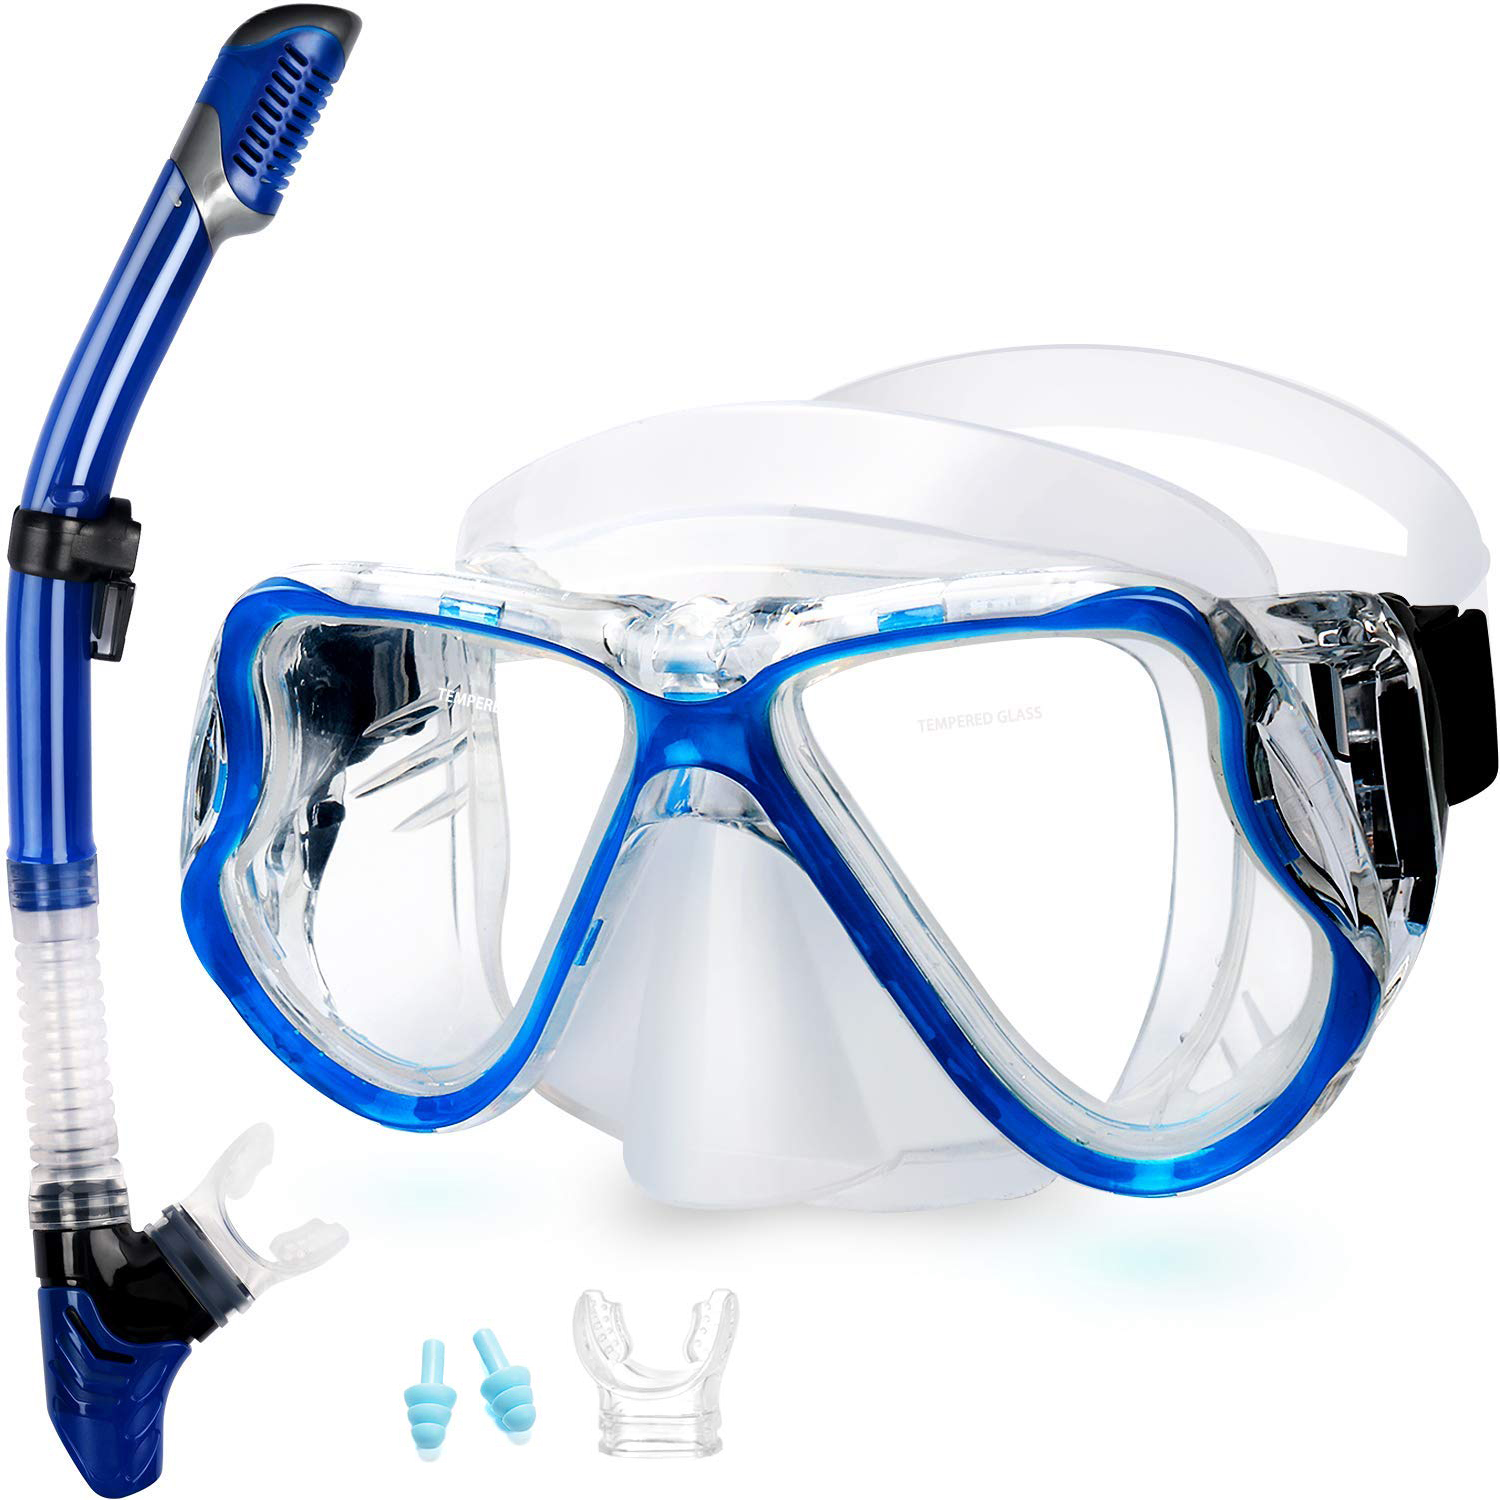 

2019 New OUTERDO Professional Adult Diving Mask Swimming